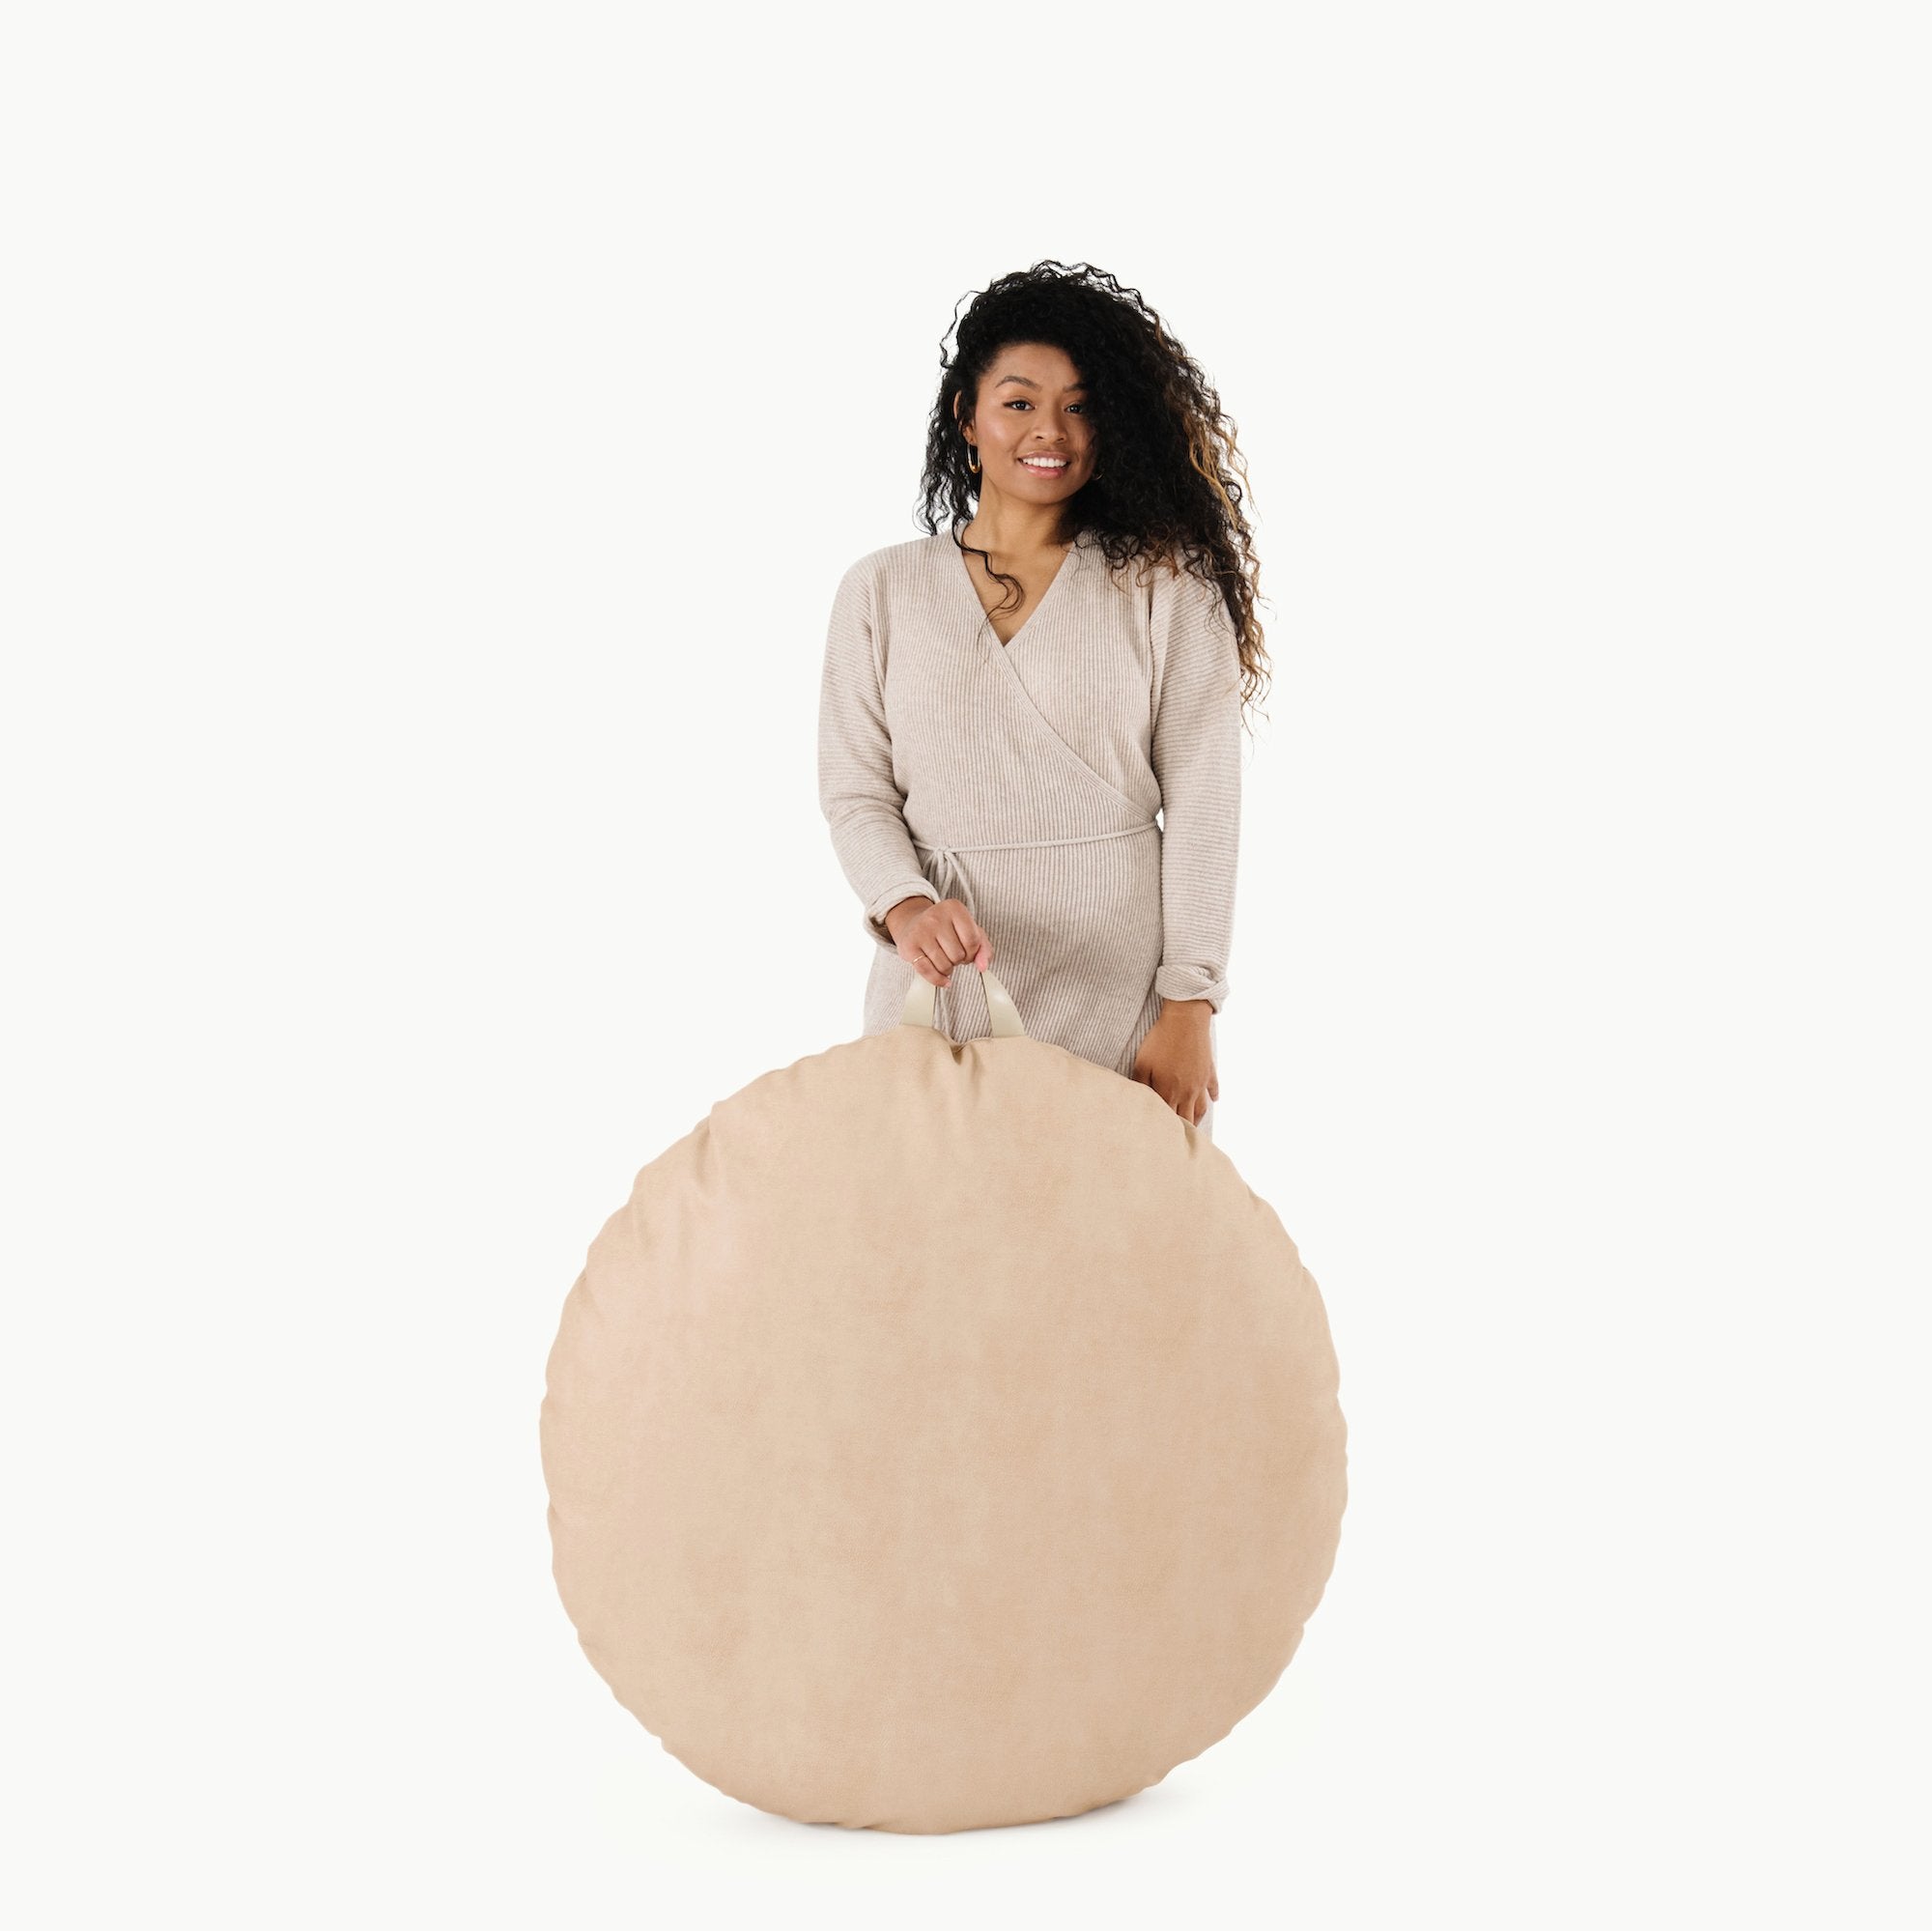 Untanned  (on sale) / Circle@Woman holding the Untanned Circle Floor Cushion